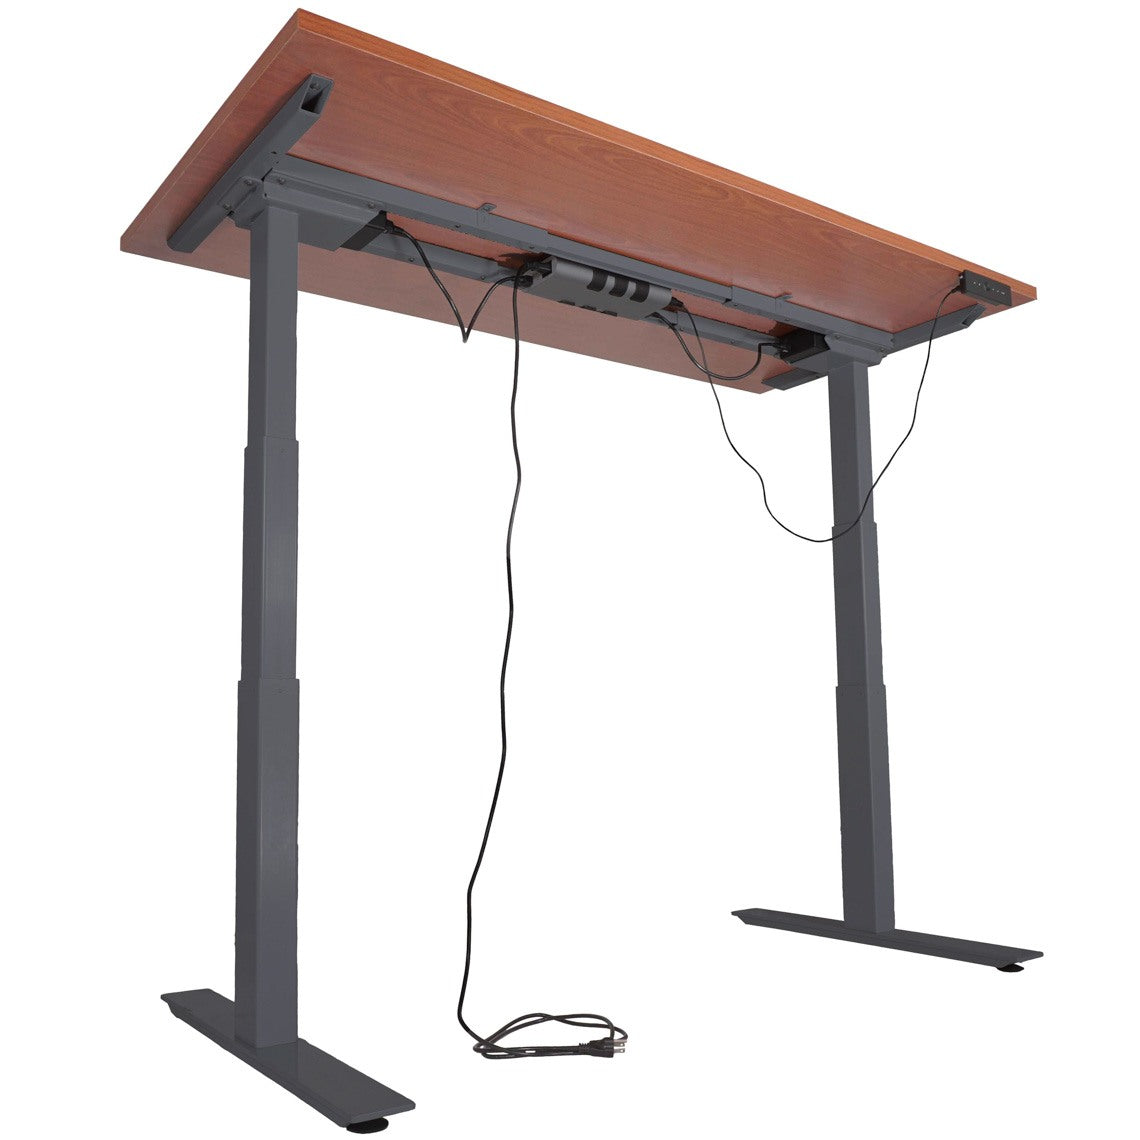 A6 Adjustable Sit To Stand Desk 24"- 50" w/ Wood 30" x 48" Top - view 4